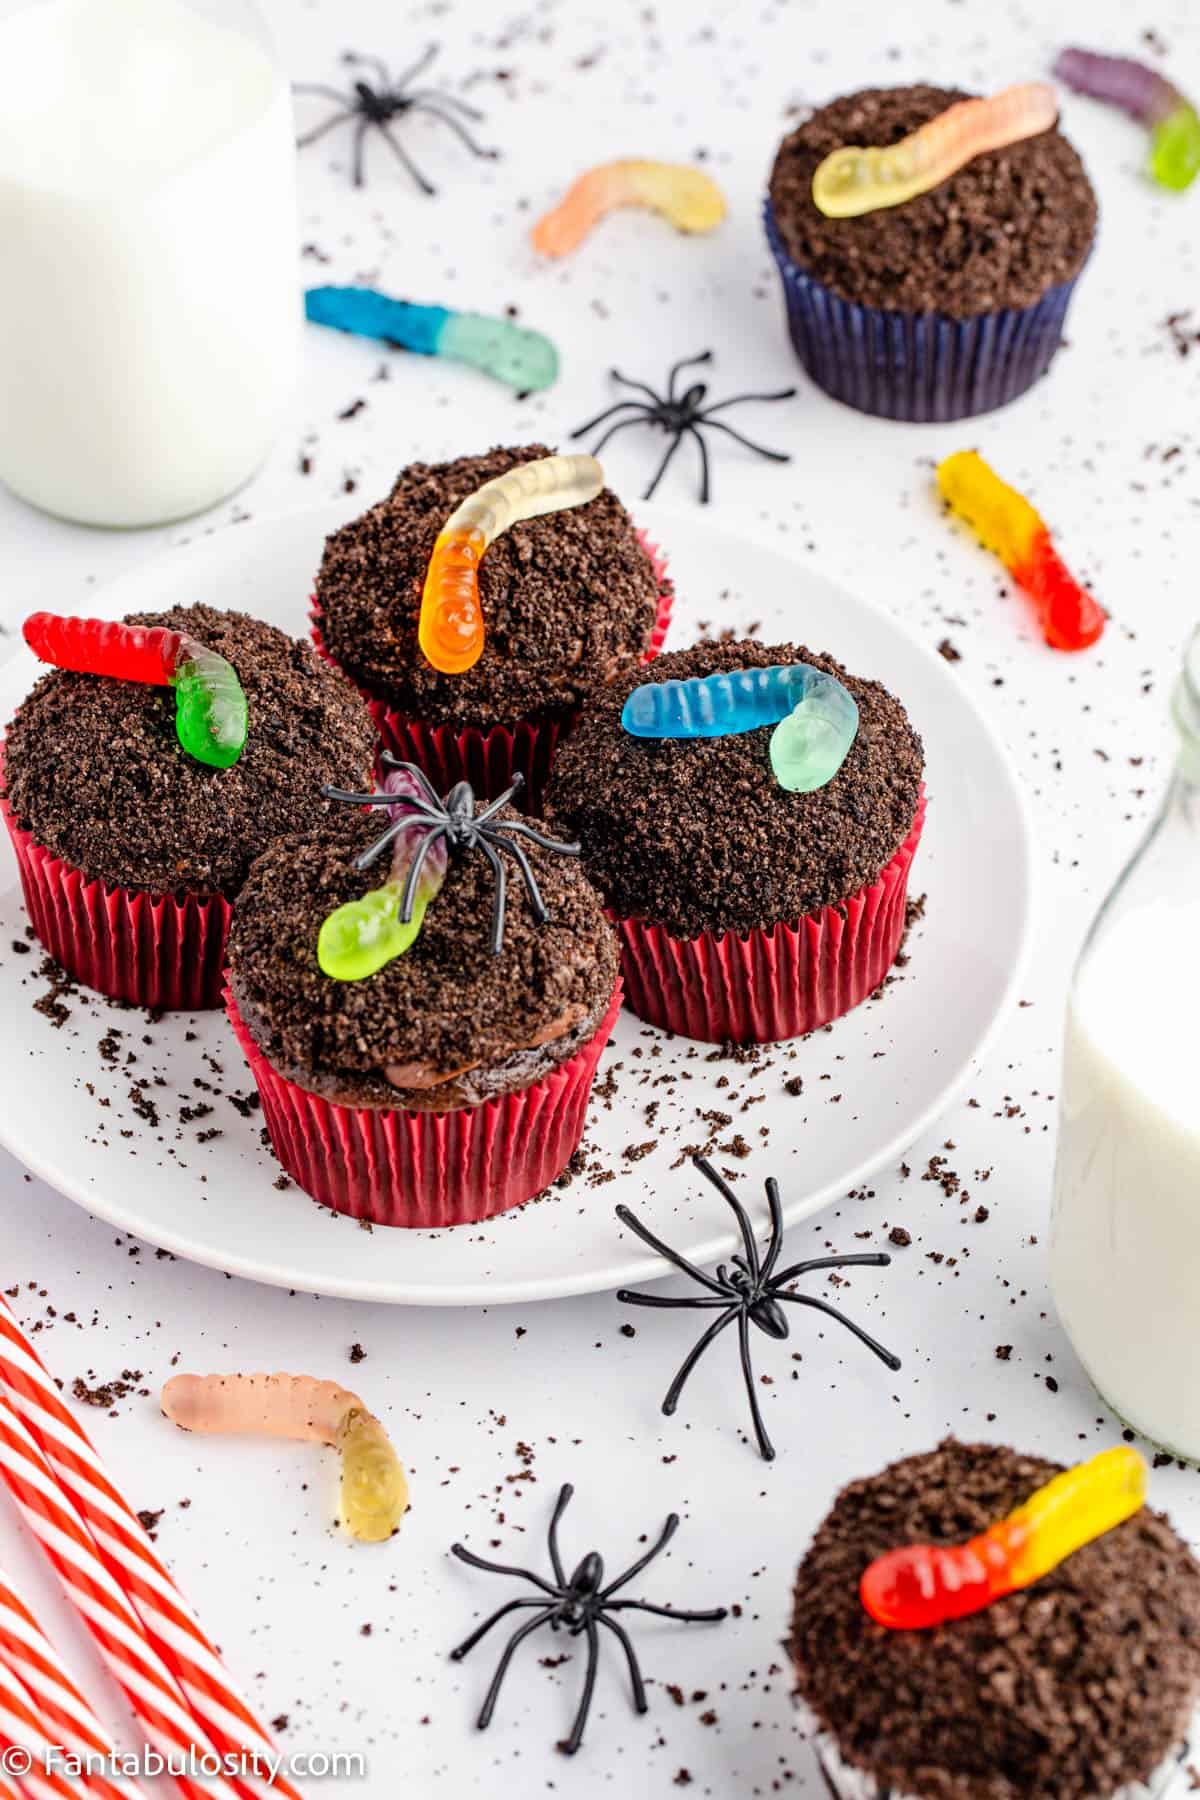 Frosted chocolate cupcakes are topped with Oreo crumbs and gummy worms, surrounded by plastic spiders, gummy worms and Oreo crumbs